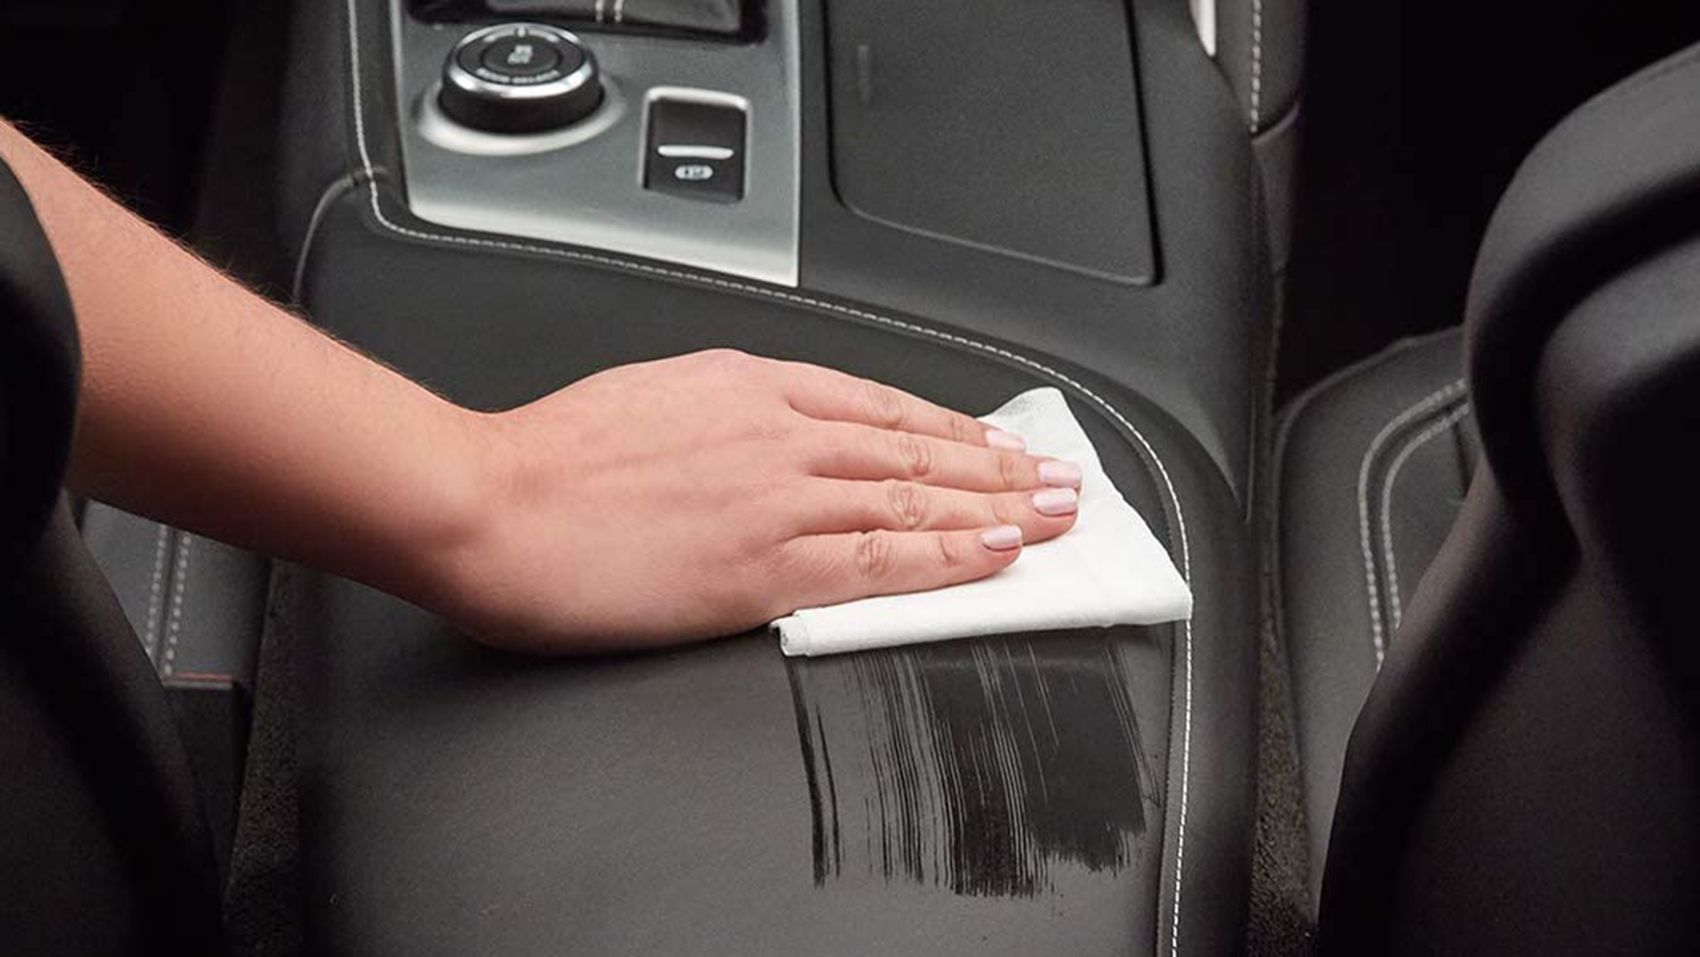 How to Keep Your Car Clean and Your Conscience Clear